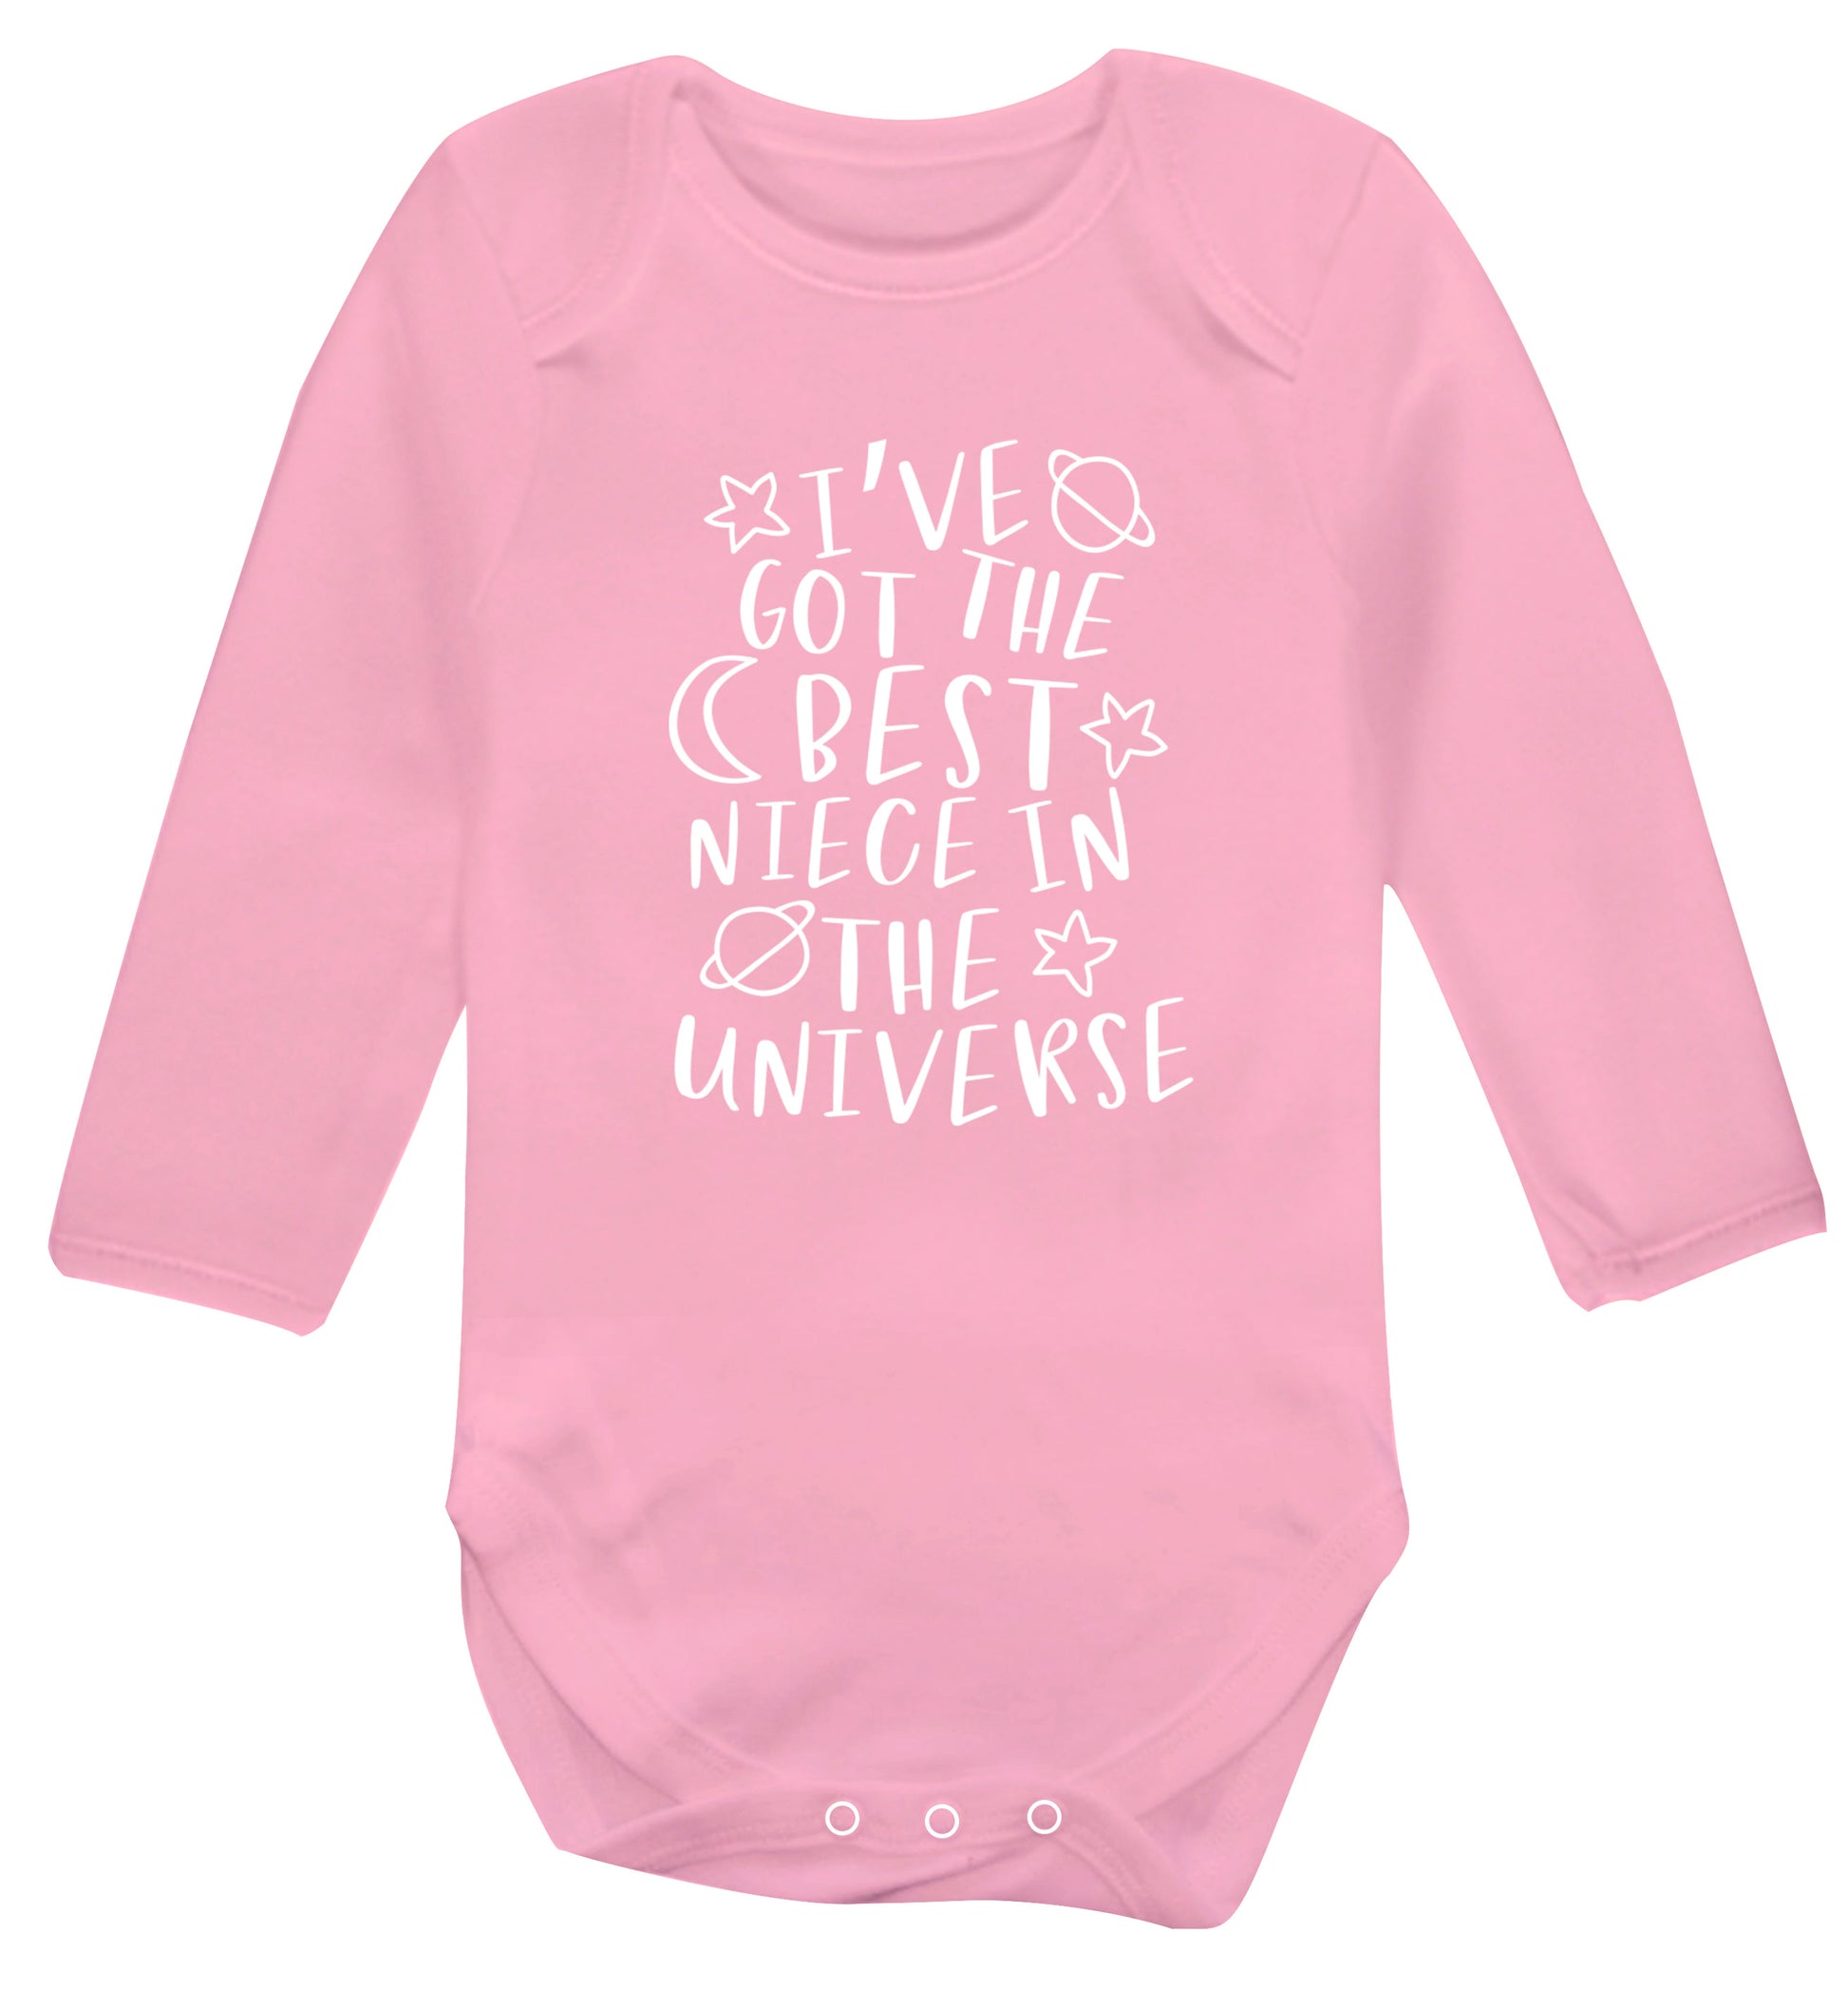 I've got the best niece in the universe Baby Vest long sleeved pale pink 6-12 months